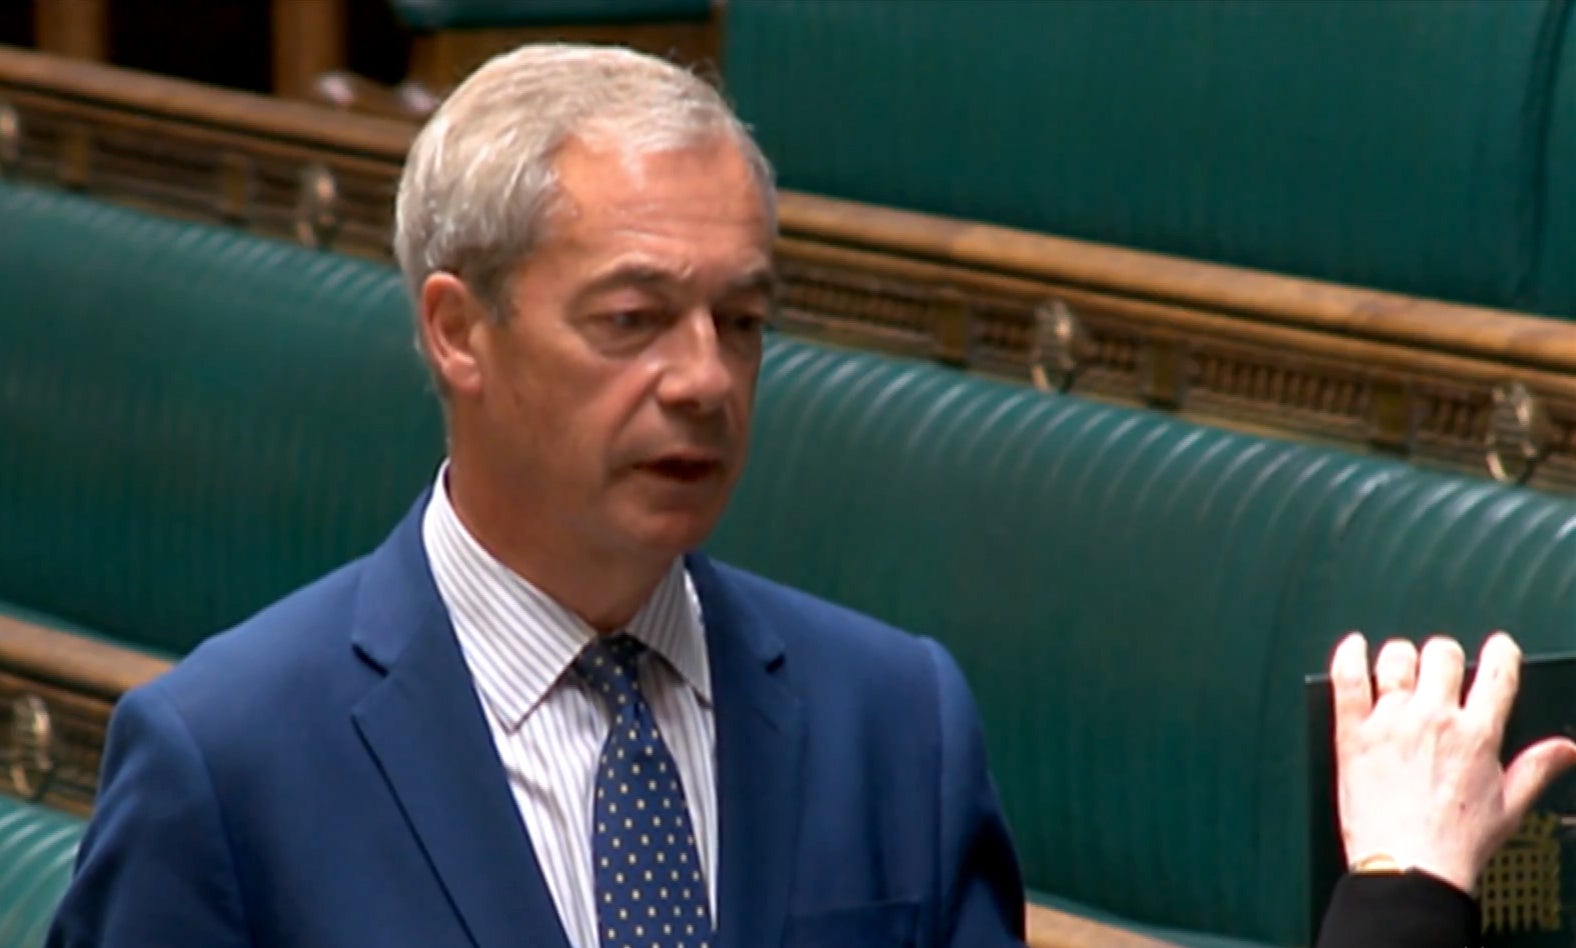 Reform UK leader Nigel Farage was sworn in to the House of Commons as the representative for Clacton (House of Commons/UK Parliament/PA)